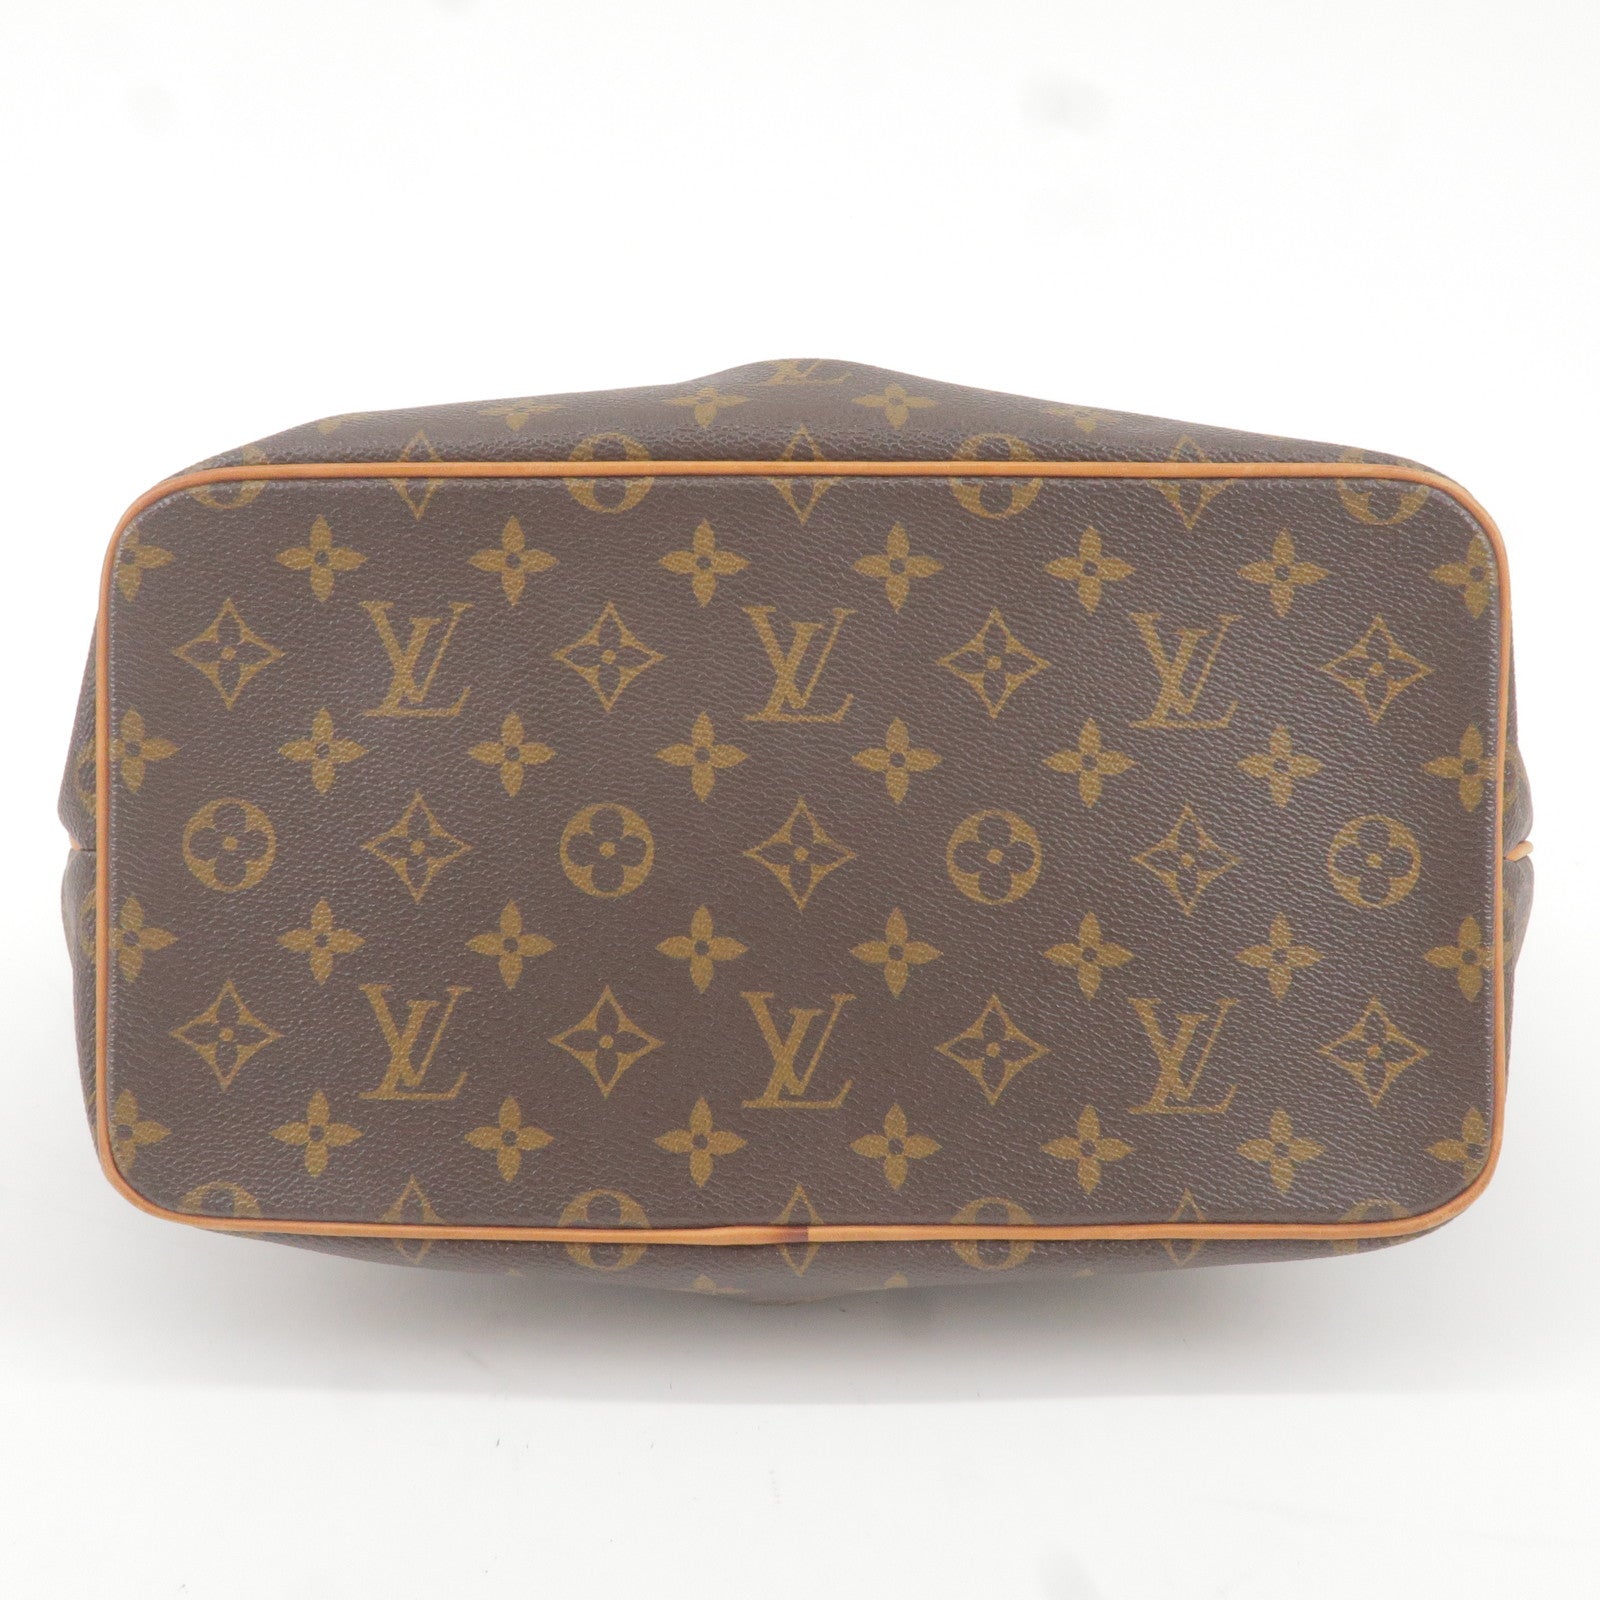 Authentic Pre Owned Louis Vuitton Neverfull GM Stephen Sprouse